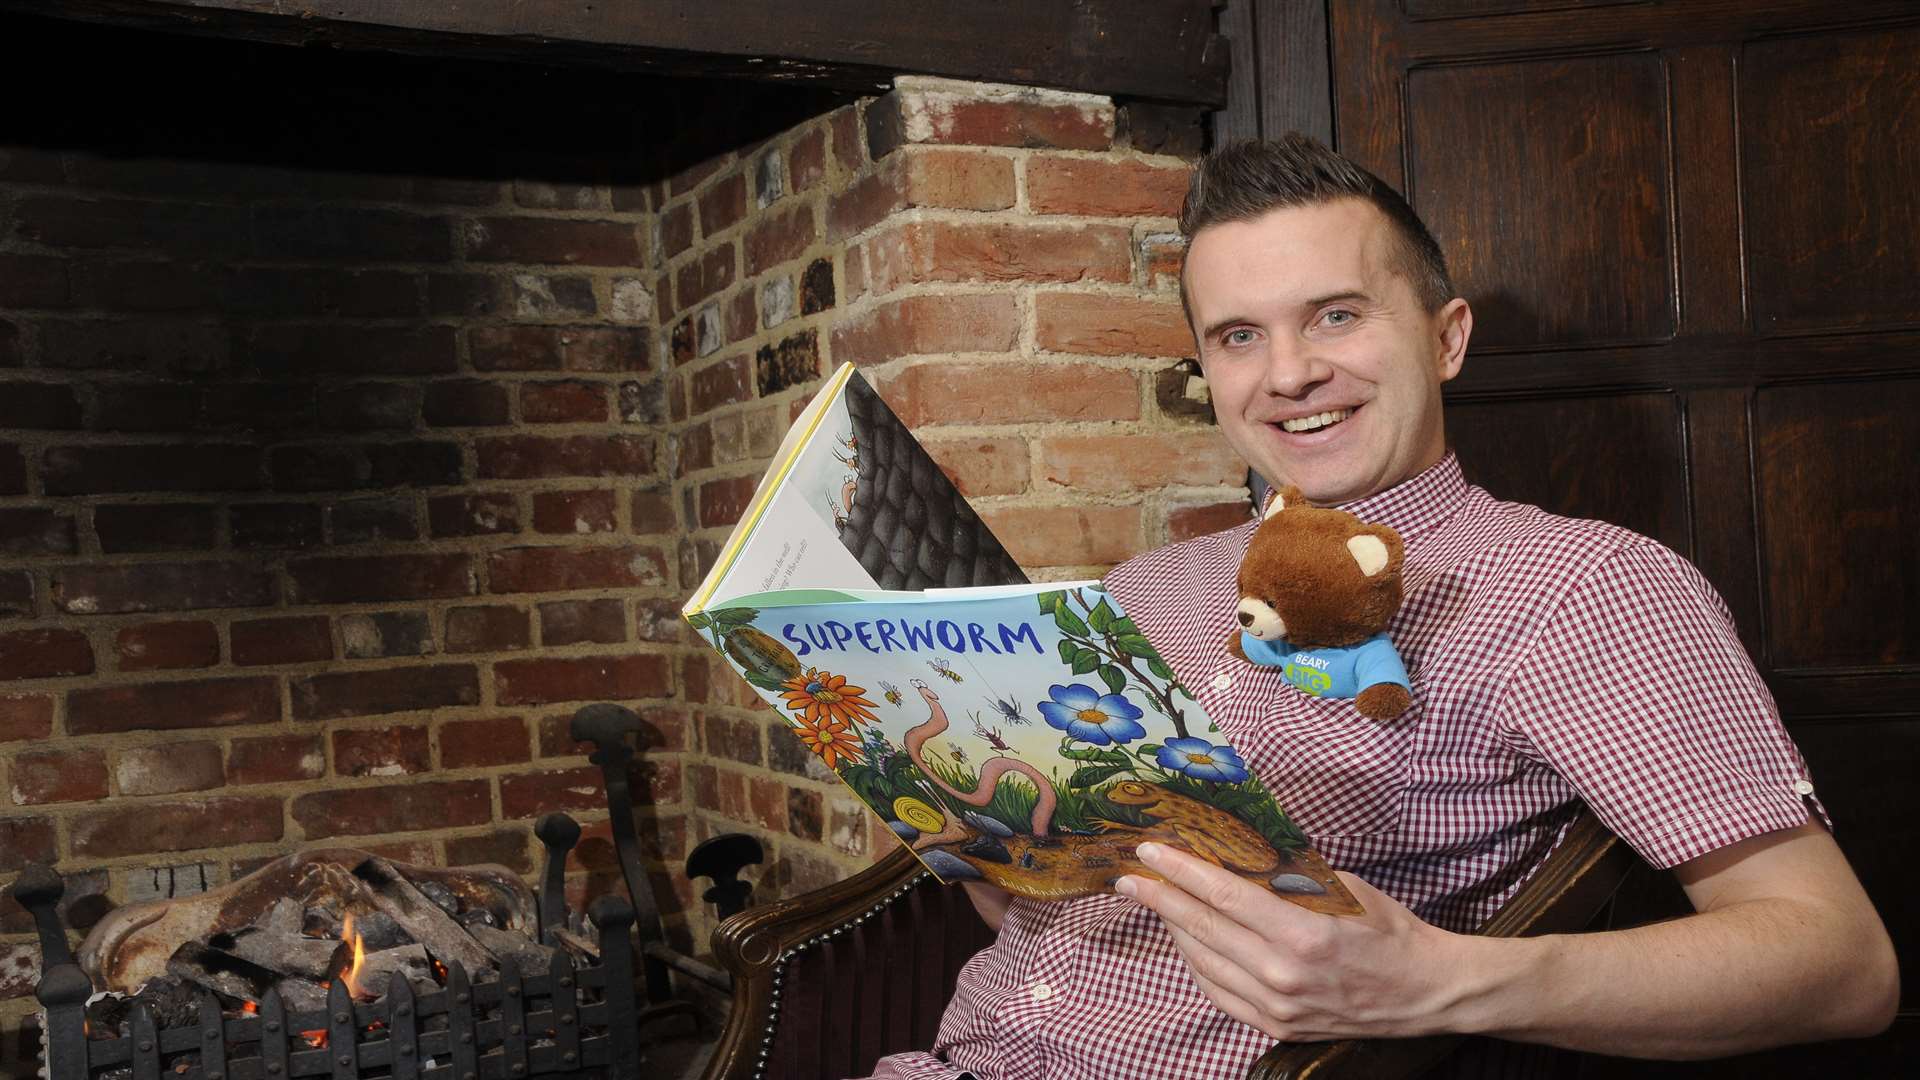 Phil Gallagher (star of CBeebies' Mister Maker) and KM Charity Team mascot Ted the bear.